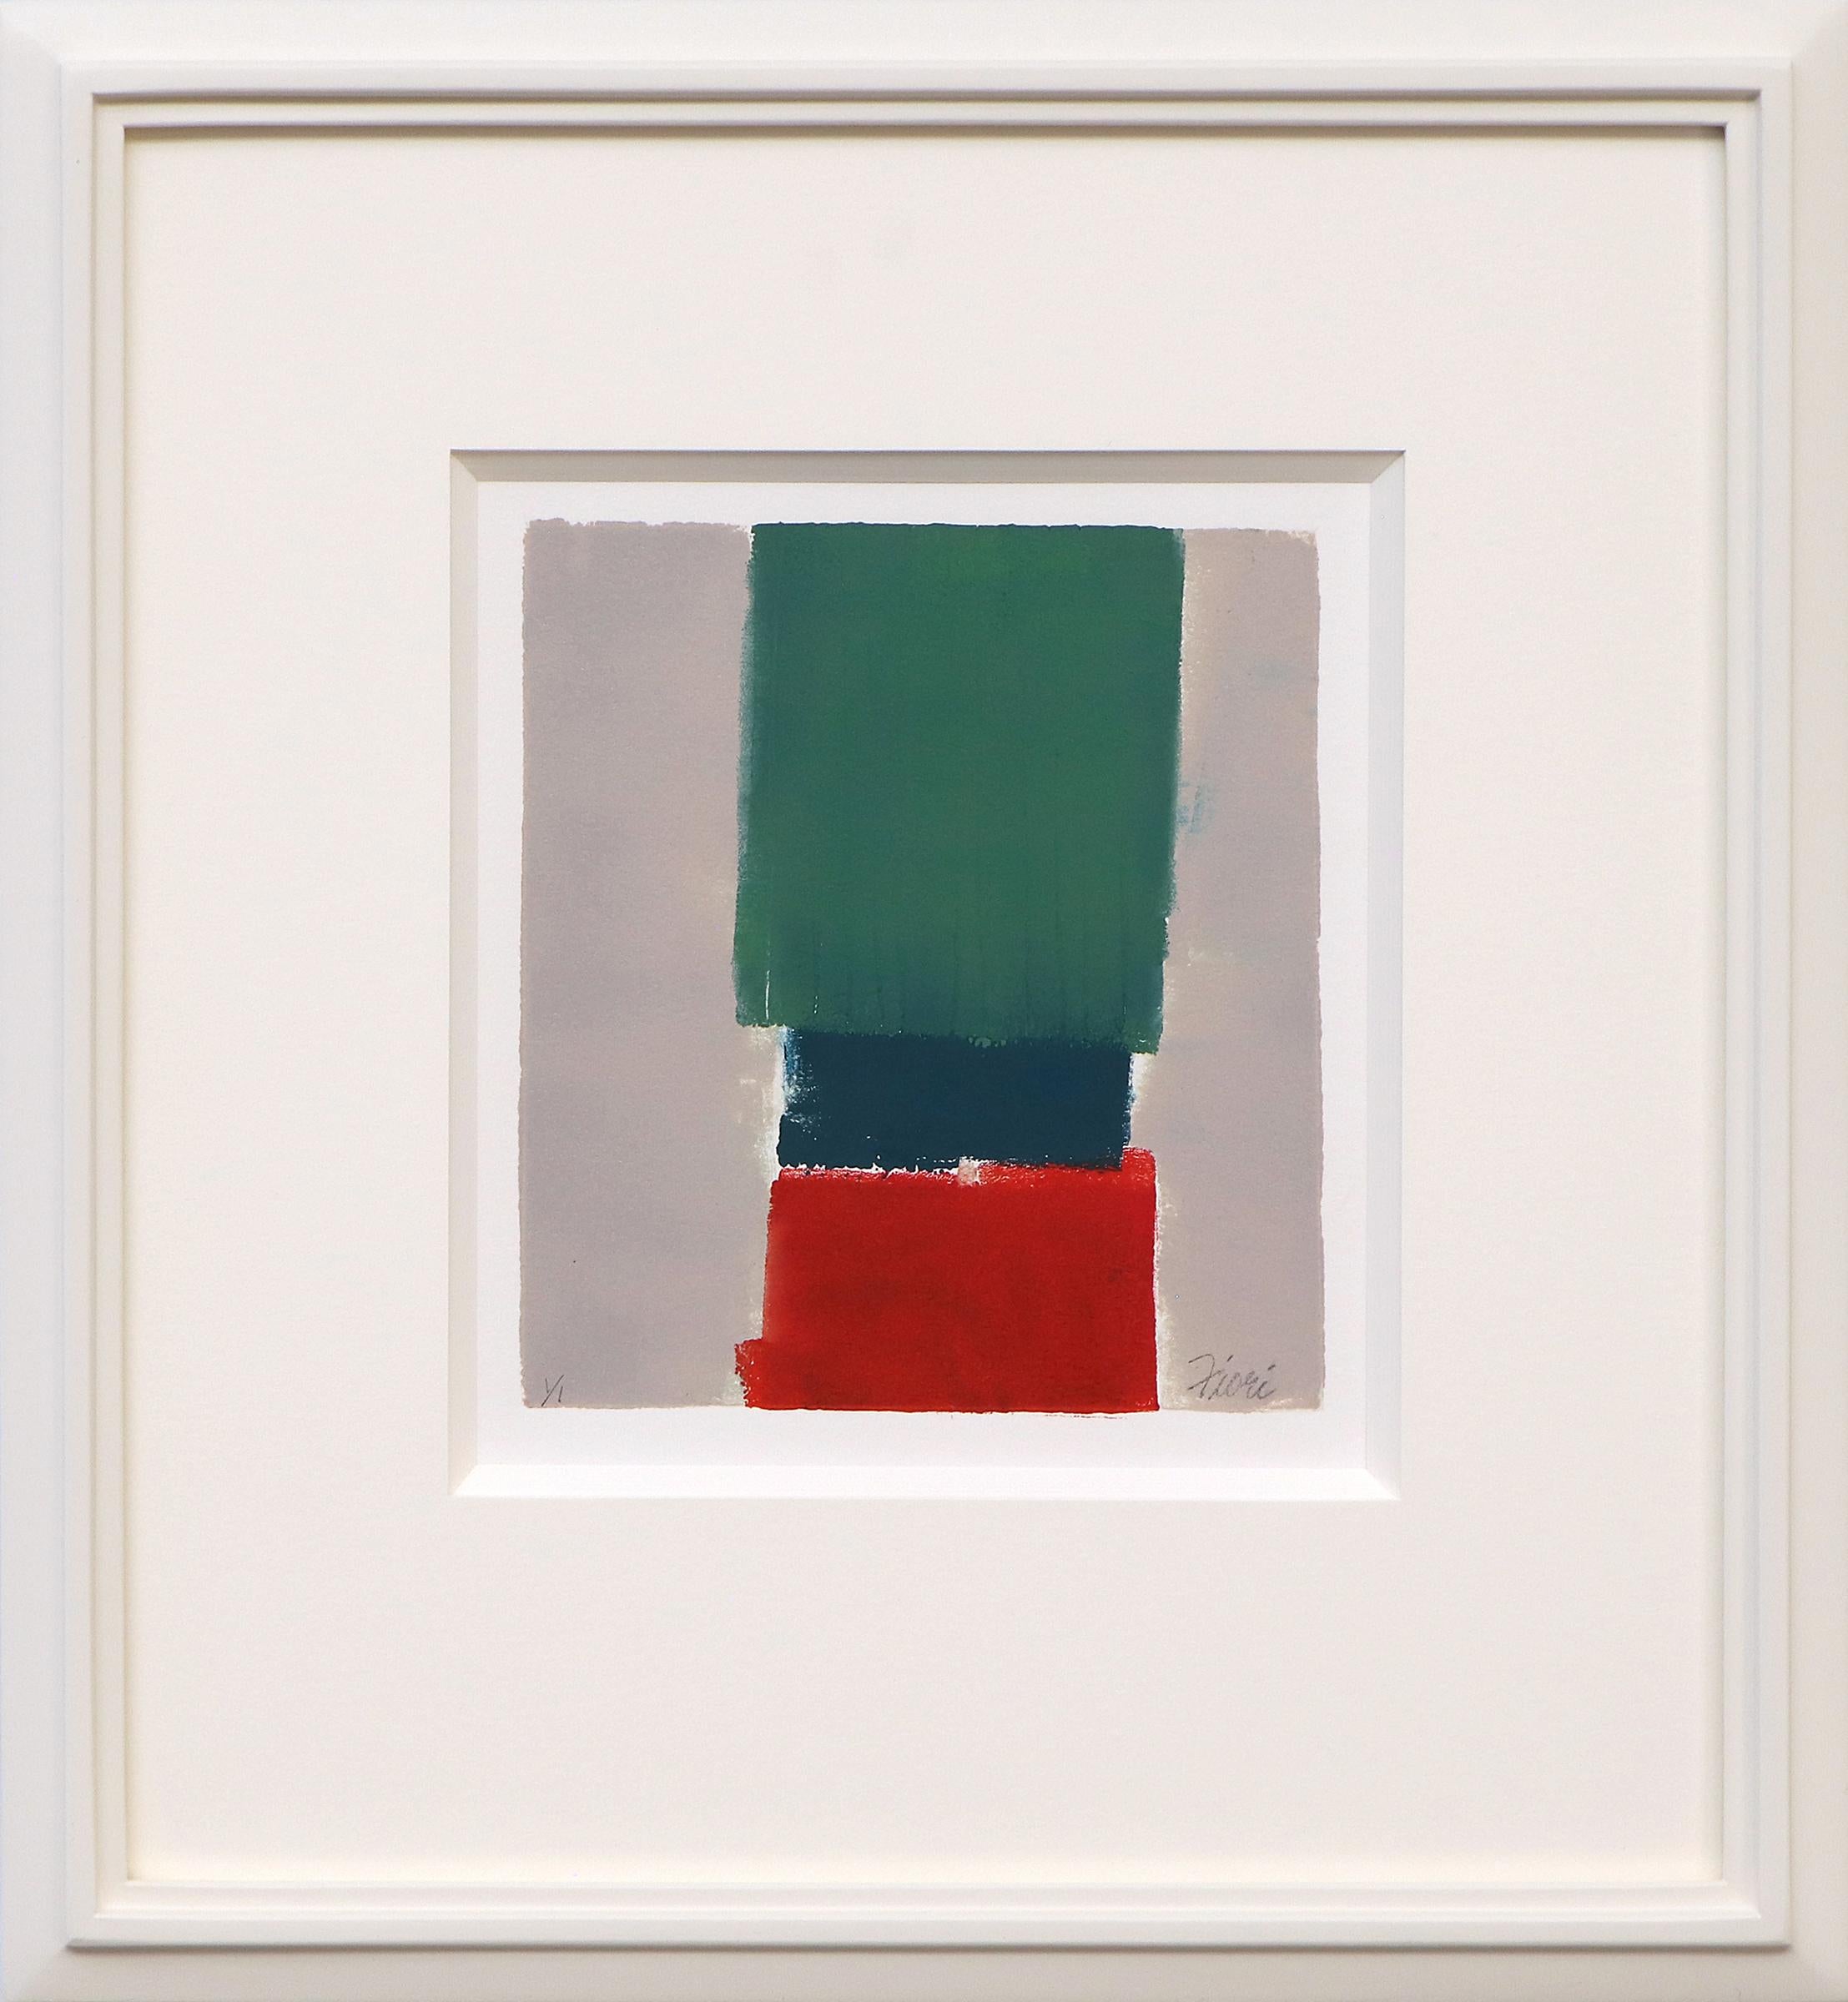 Framed Vintage Abstract Monotype with Rectangles in Gray, Blue, Red, and Green 